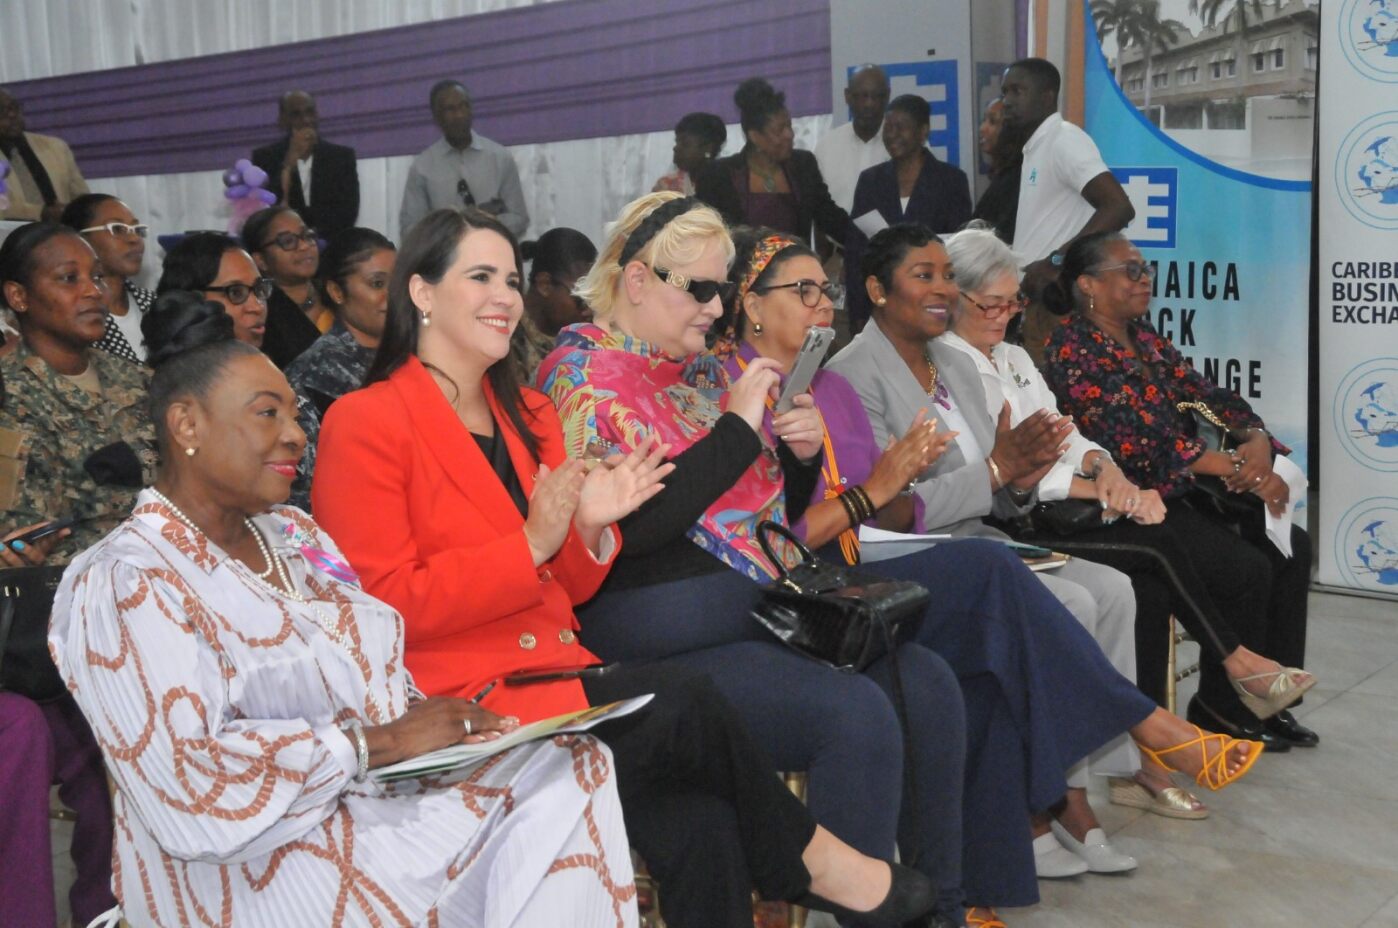 A cross section of the audience present at the Ring the Bell Ceremony at the Jamaica Stock Exchange